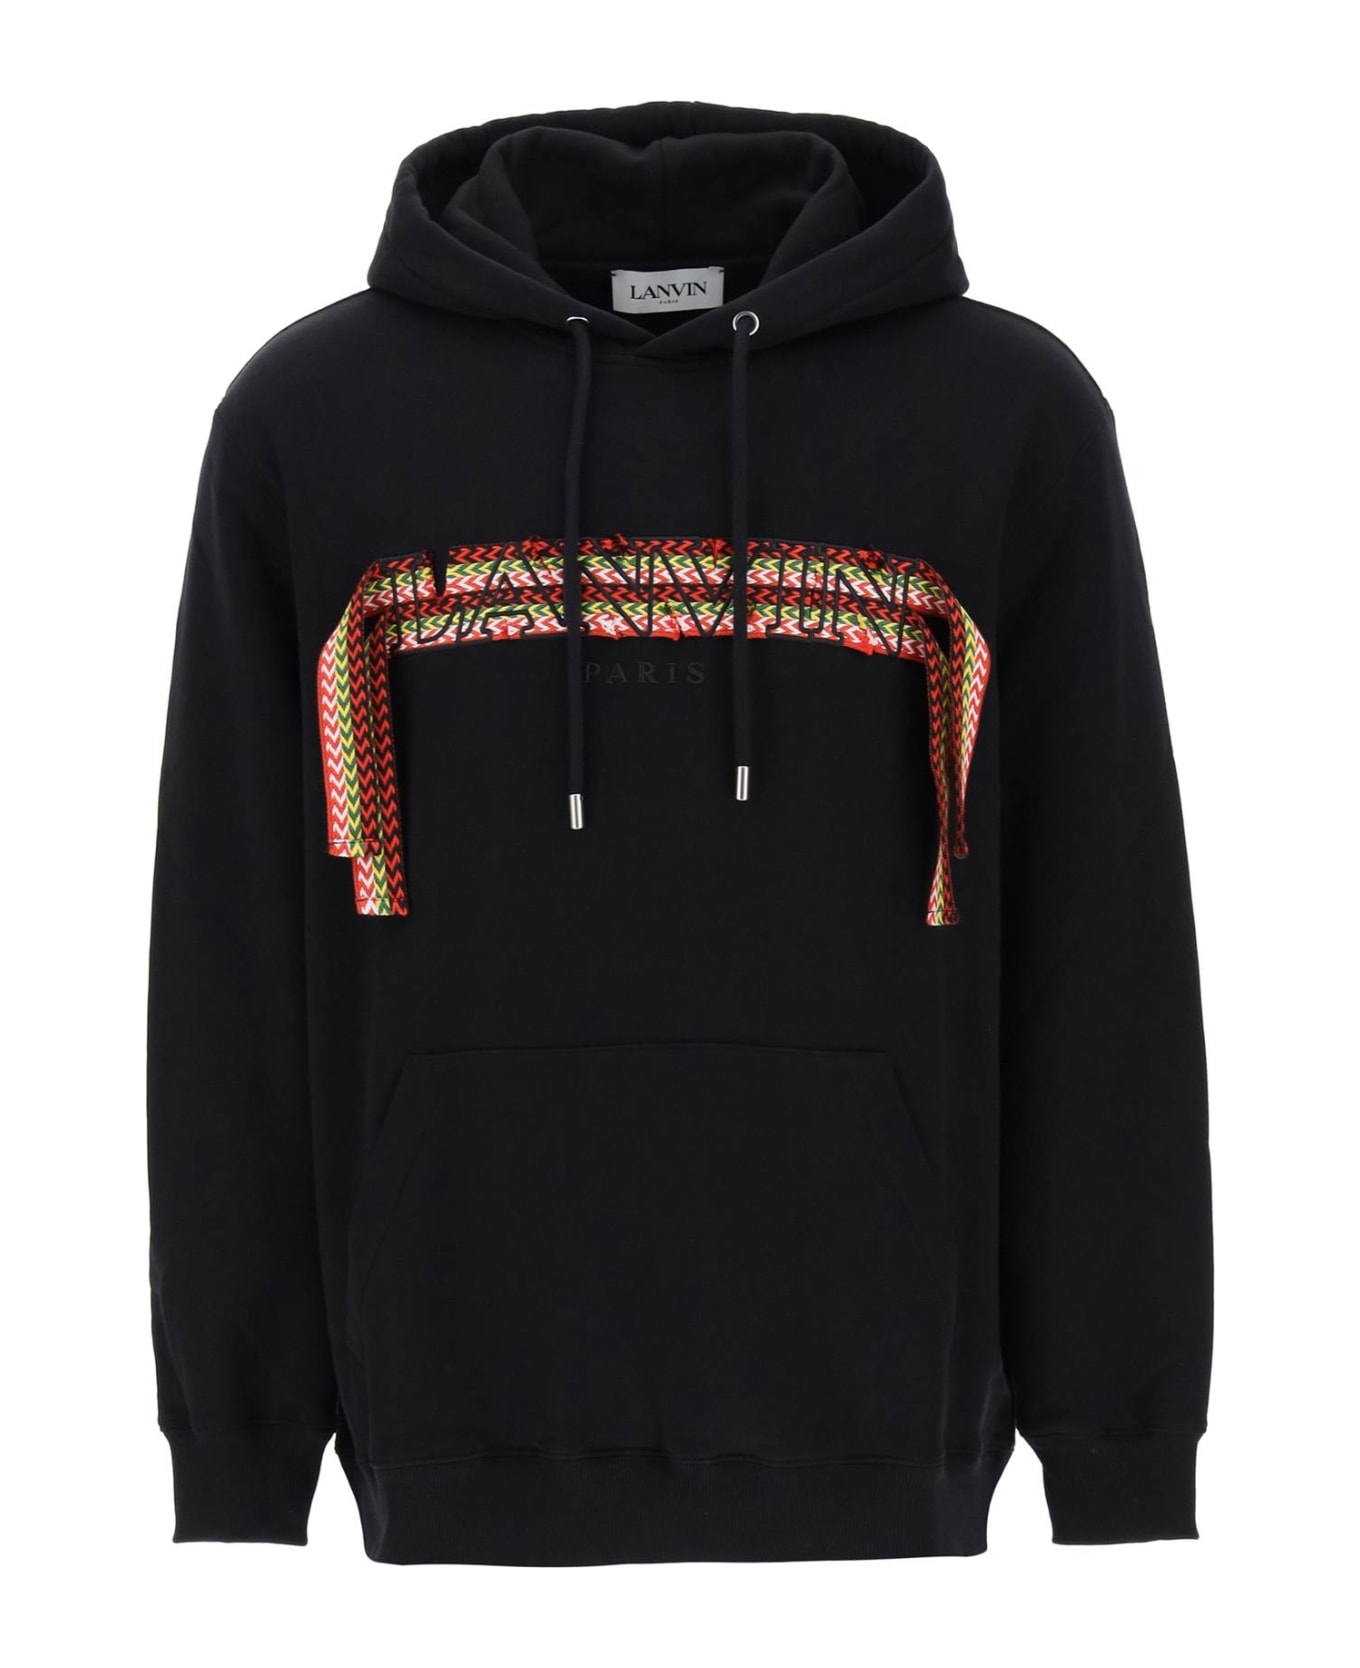 Lanvin 'curb Lace' Oversized Hoodie - Black